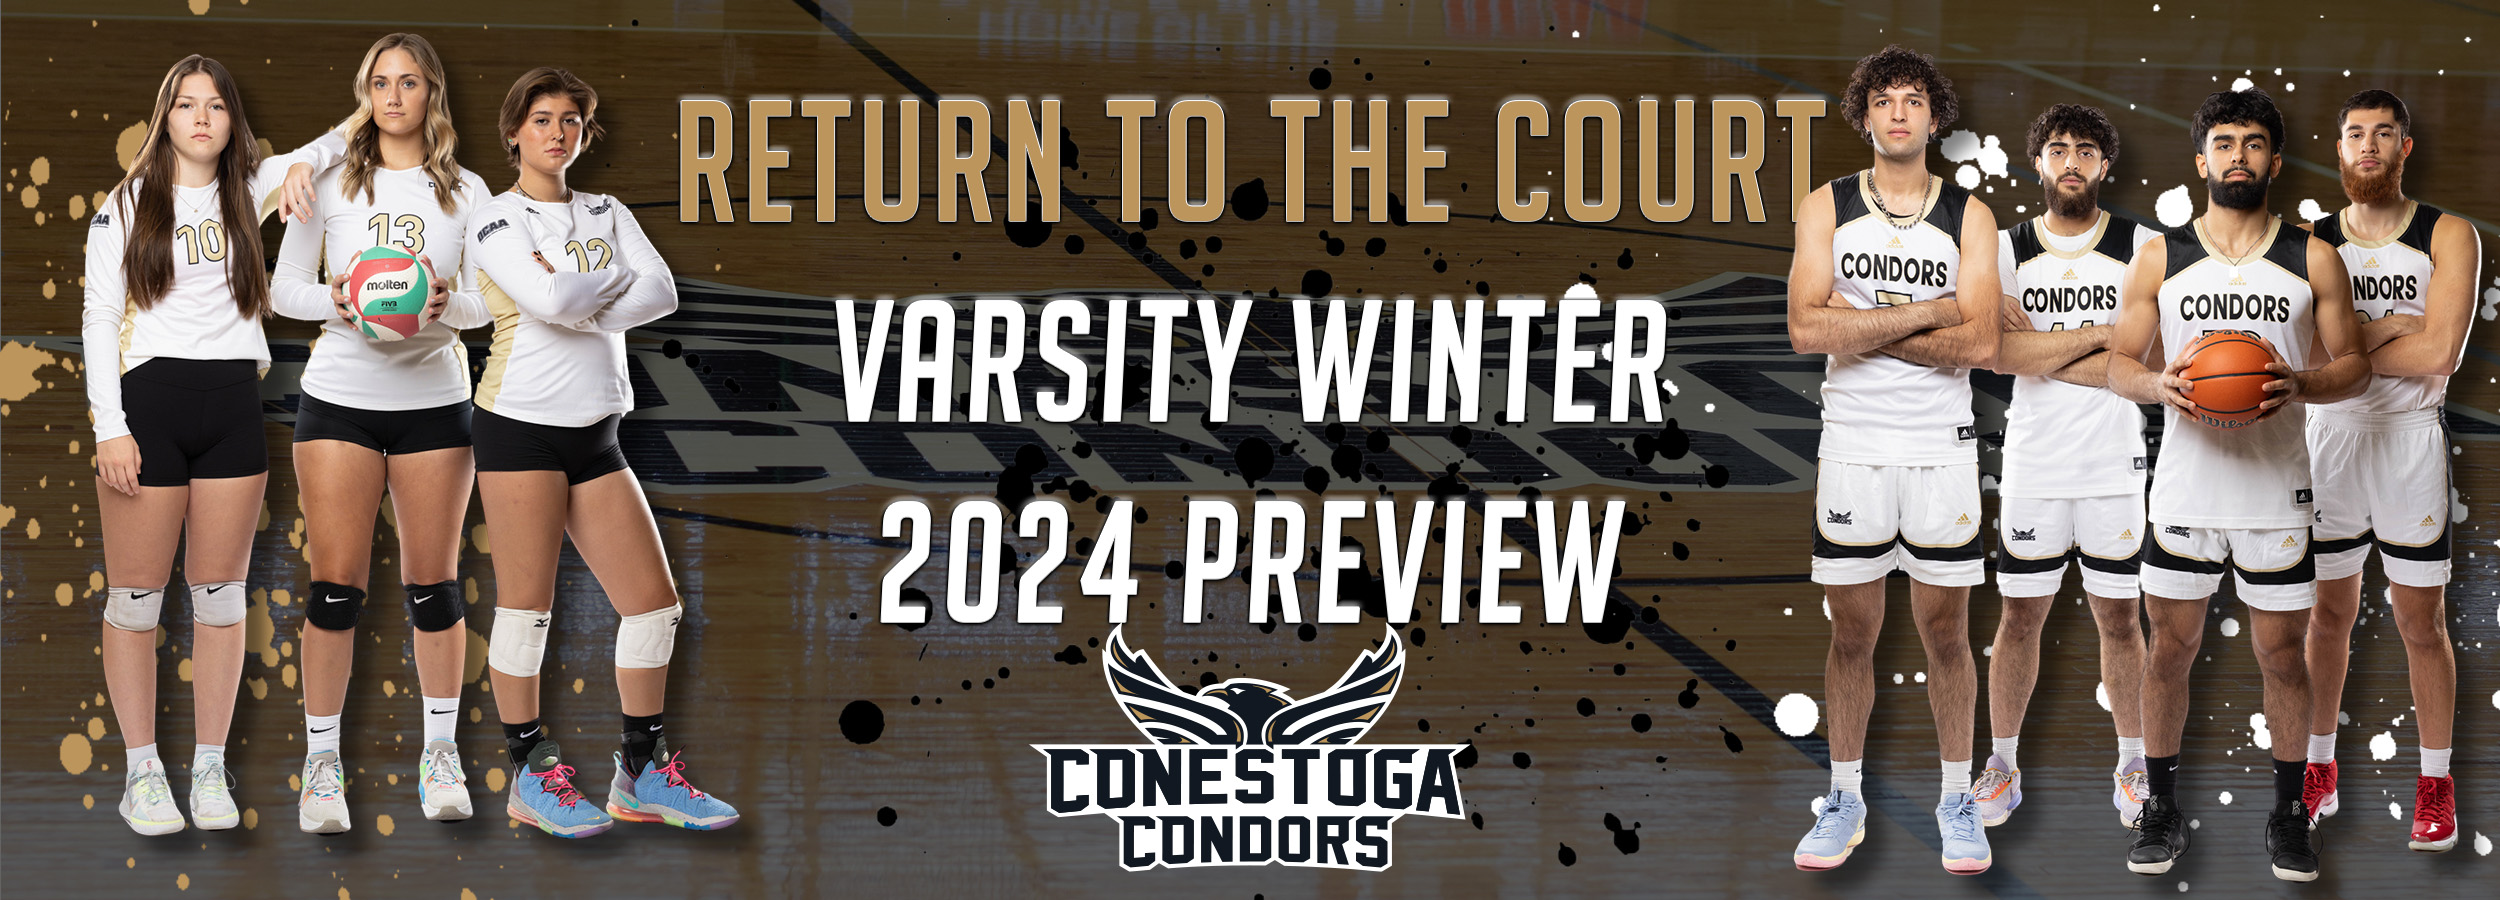 Return to the Court Banner Featuring Conestoga Volleyball and Basketball Athletes 